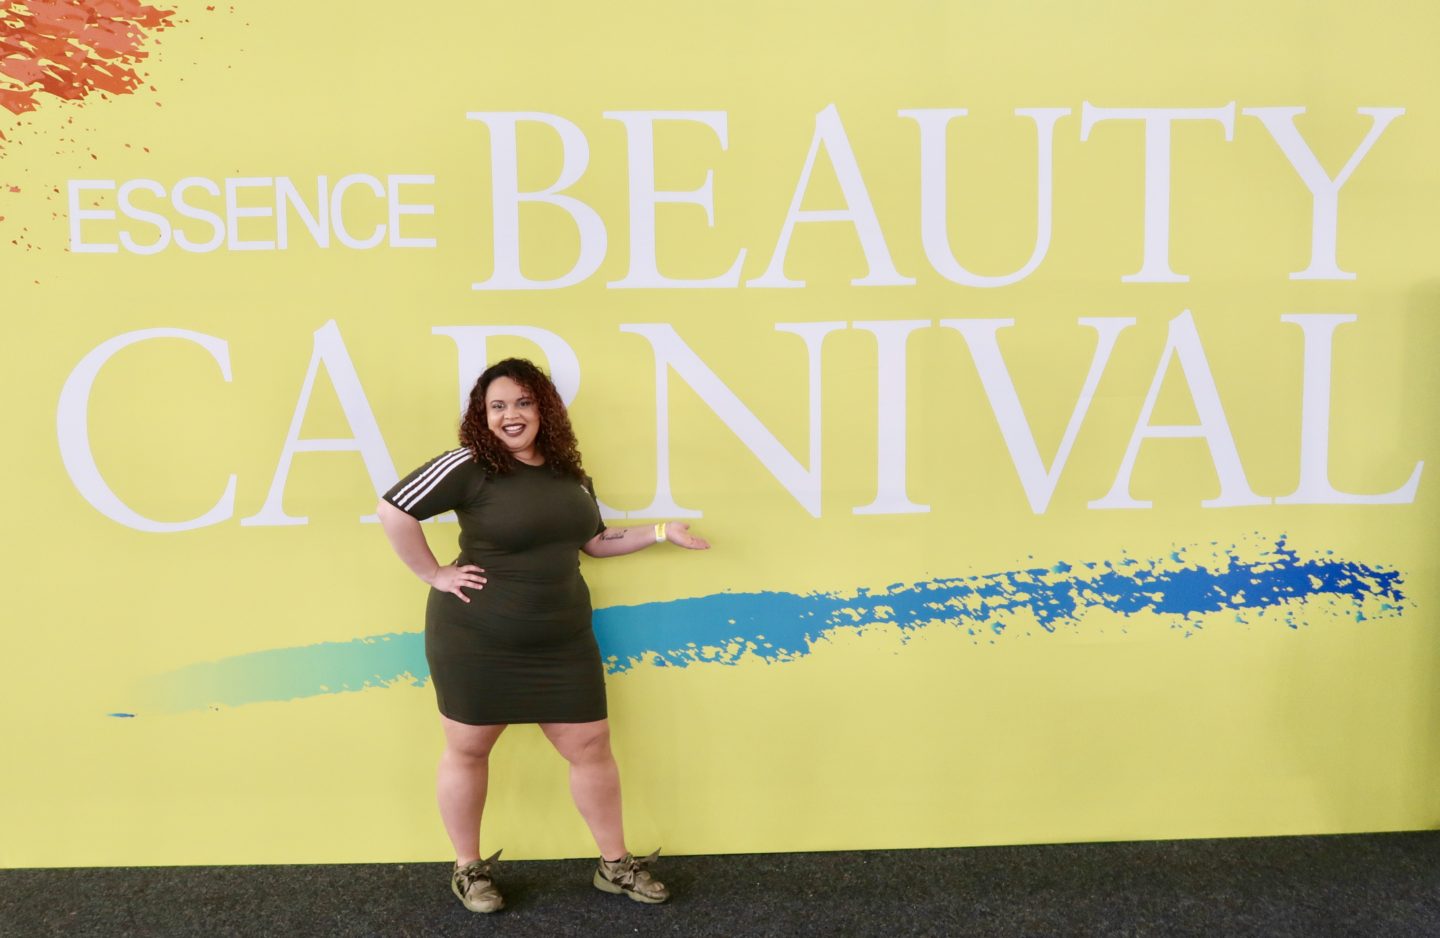 The First Ever Essence Beauty Carnival